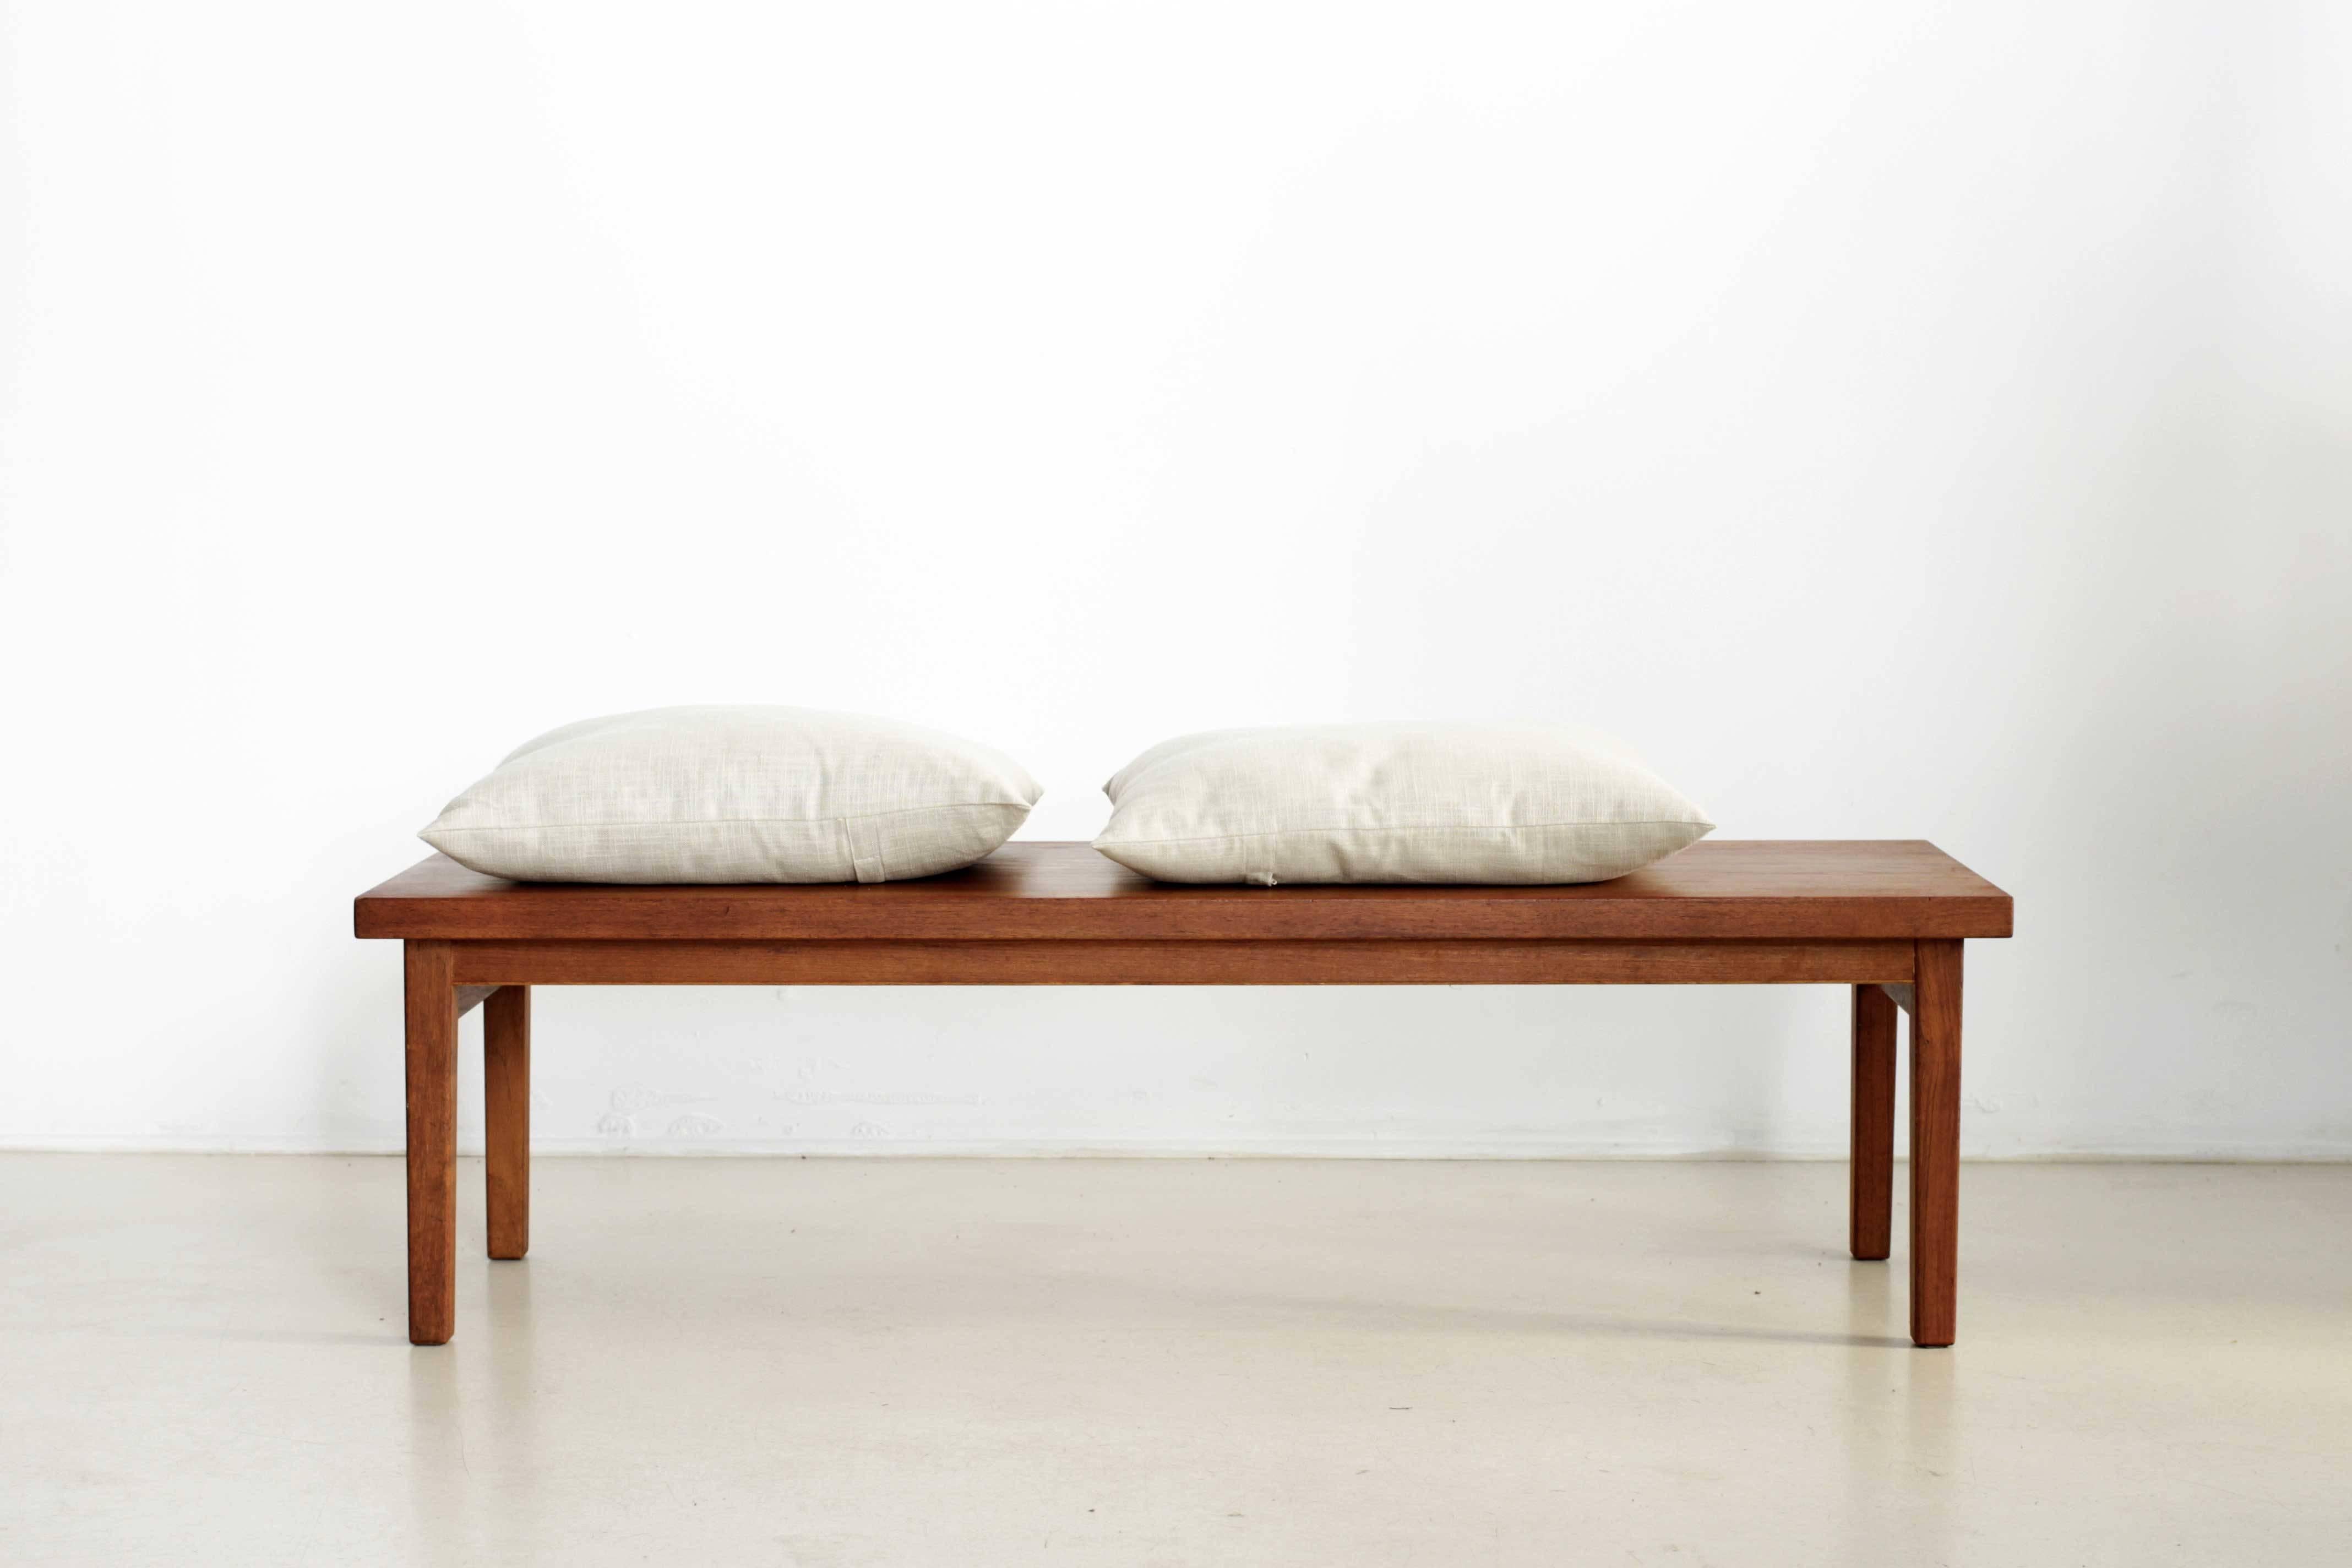 Modernist scandinavian coffee table made of teak. Can be also used as a bench.